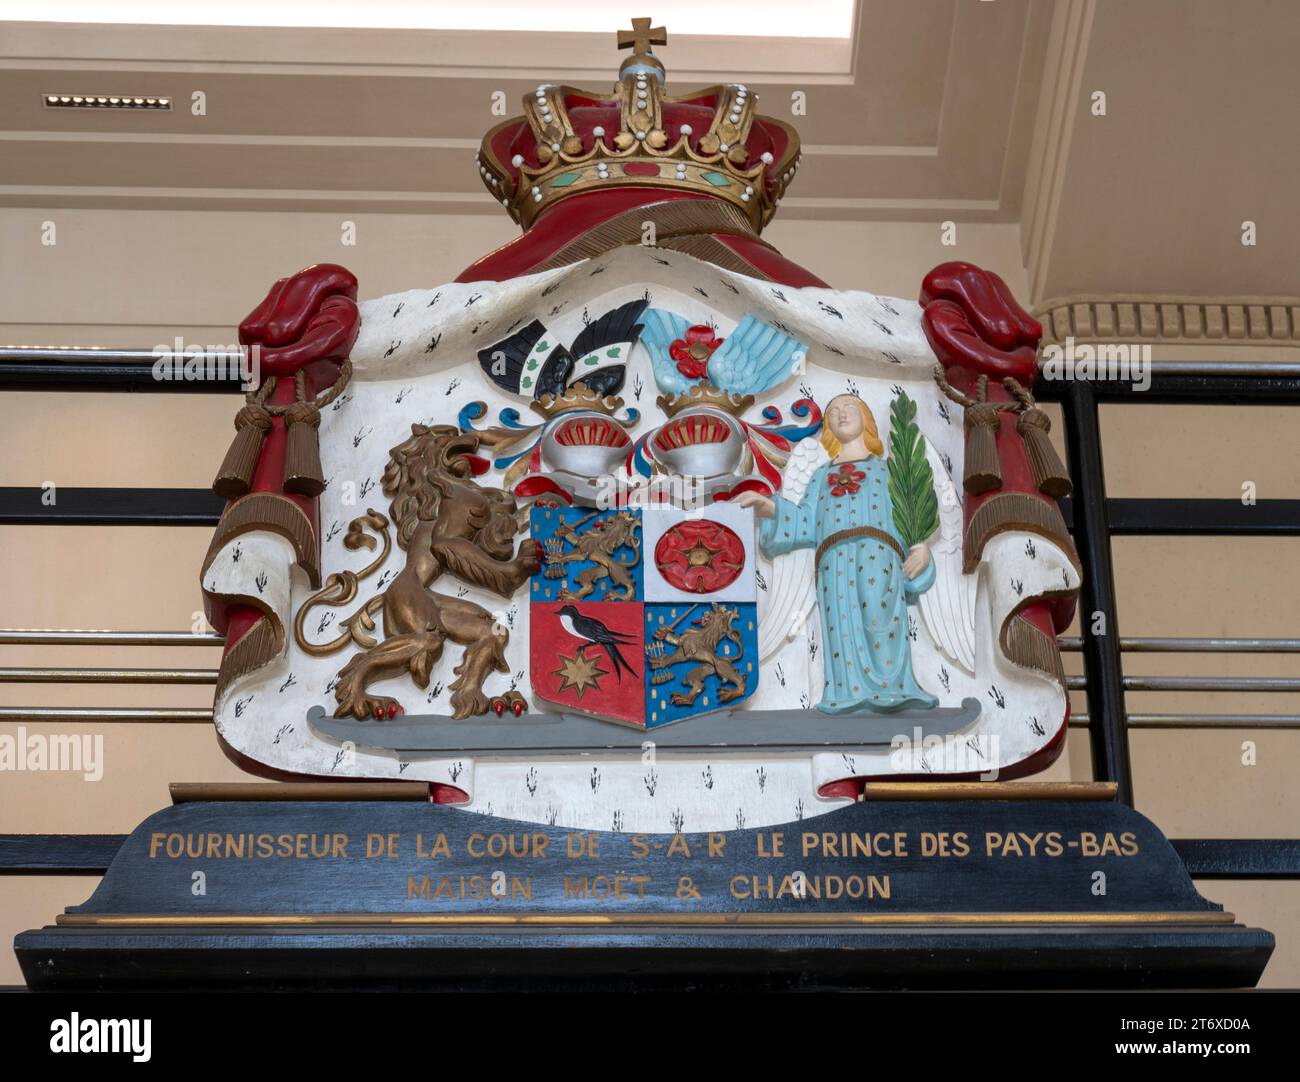 Coat of Arms on display in the reception area at the headquarters of Moet & Chandon, Avenue de Champagne, Epernay, France. Stock Photo